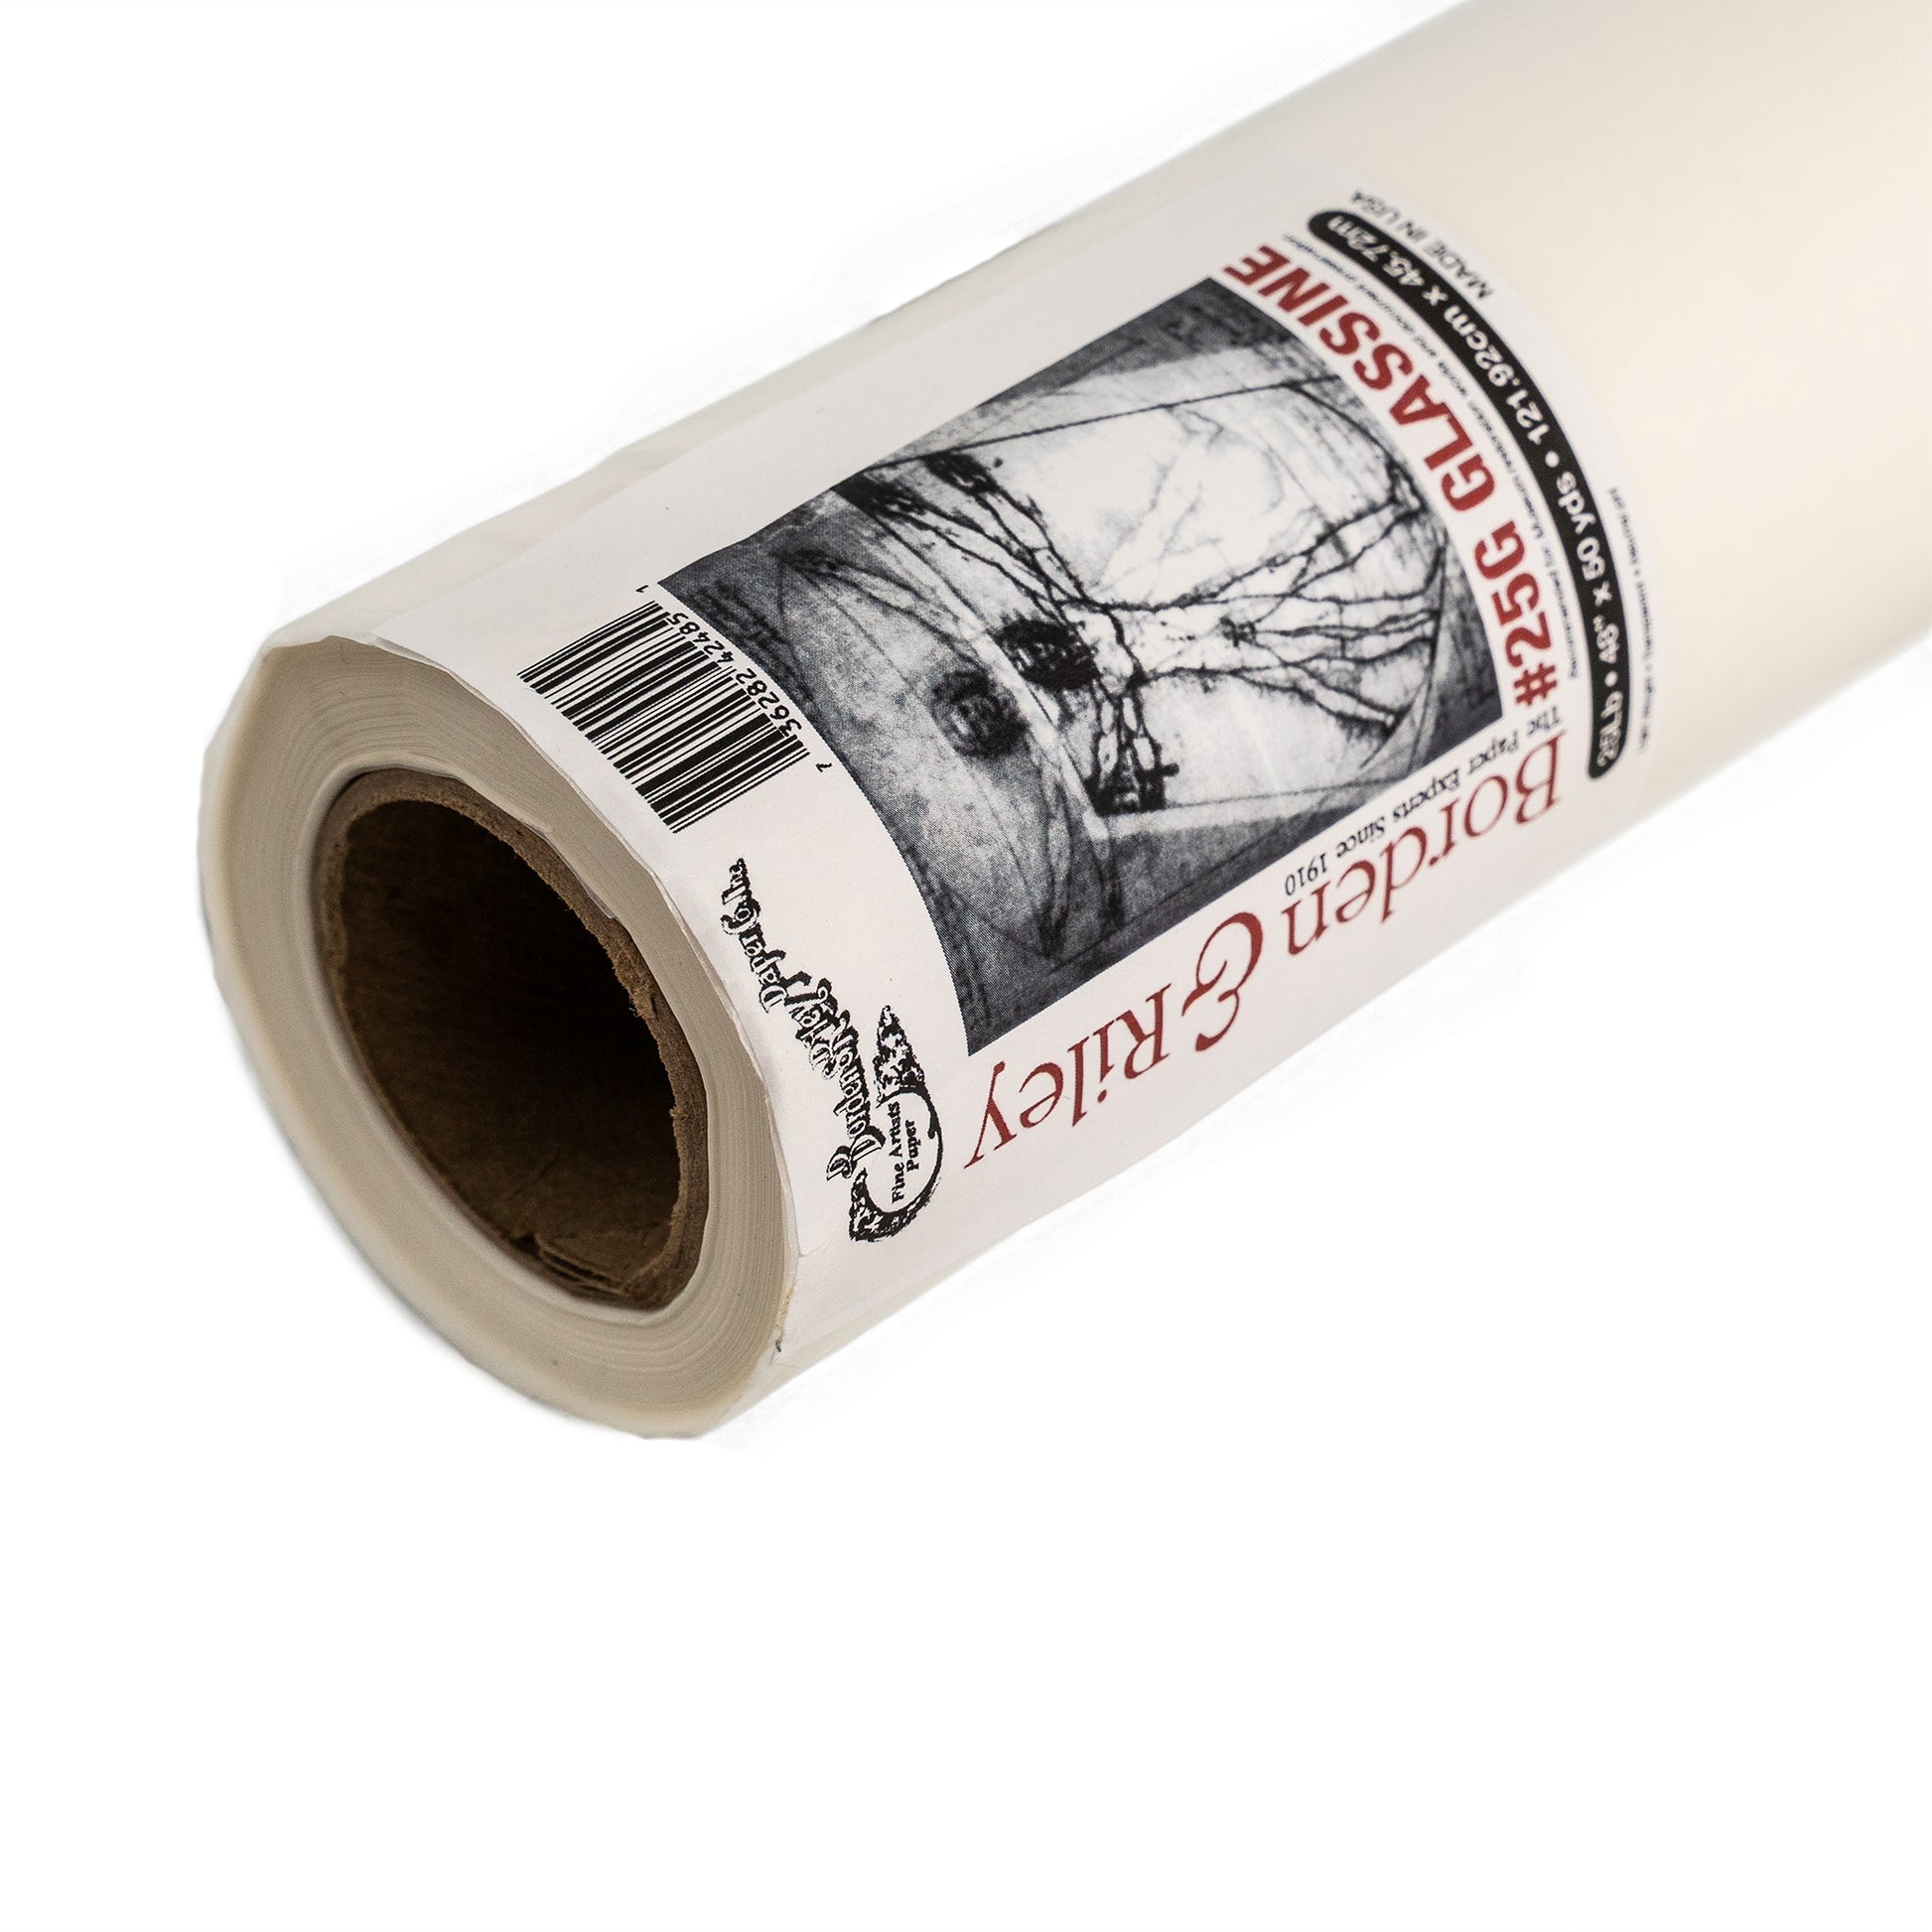 Borden and Riley #25G Glassine Paper Roll - 48 inches x 20 yards - by Borden and Riley - K. A. Artist Shop